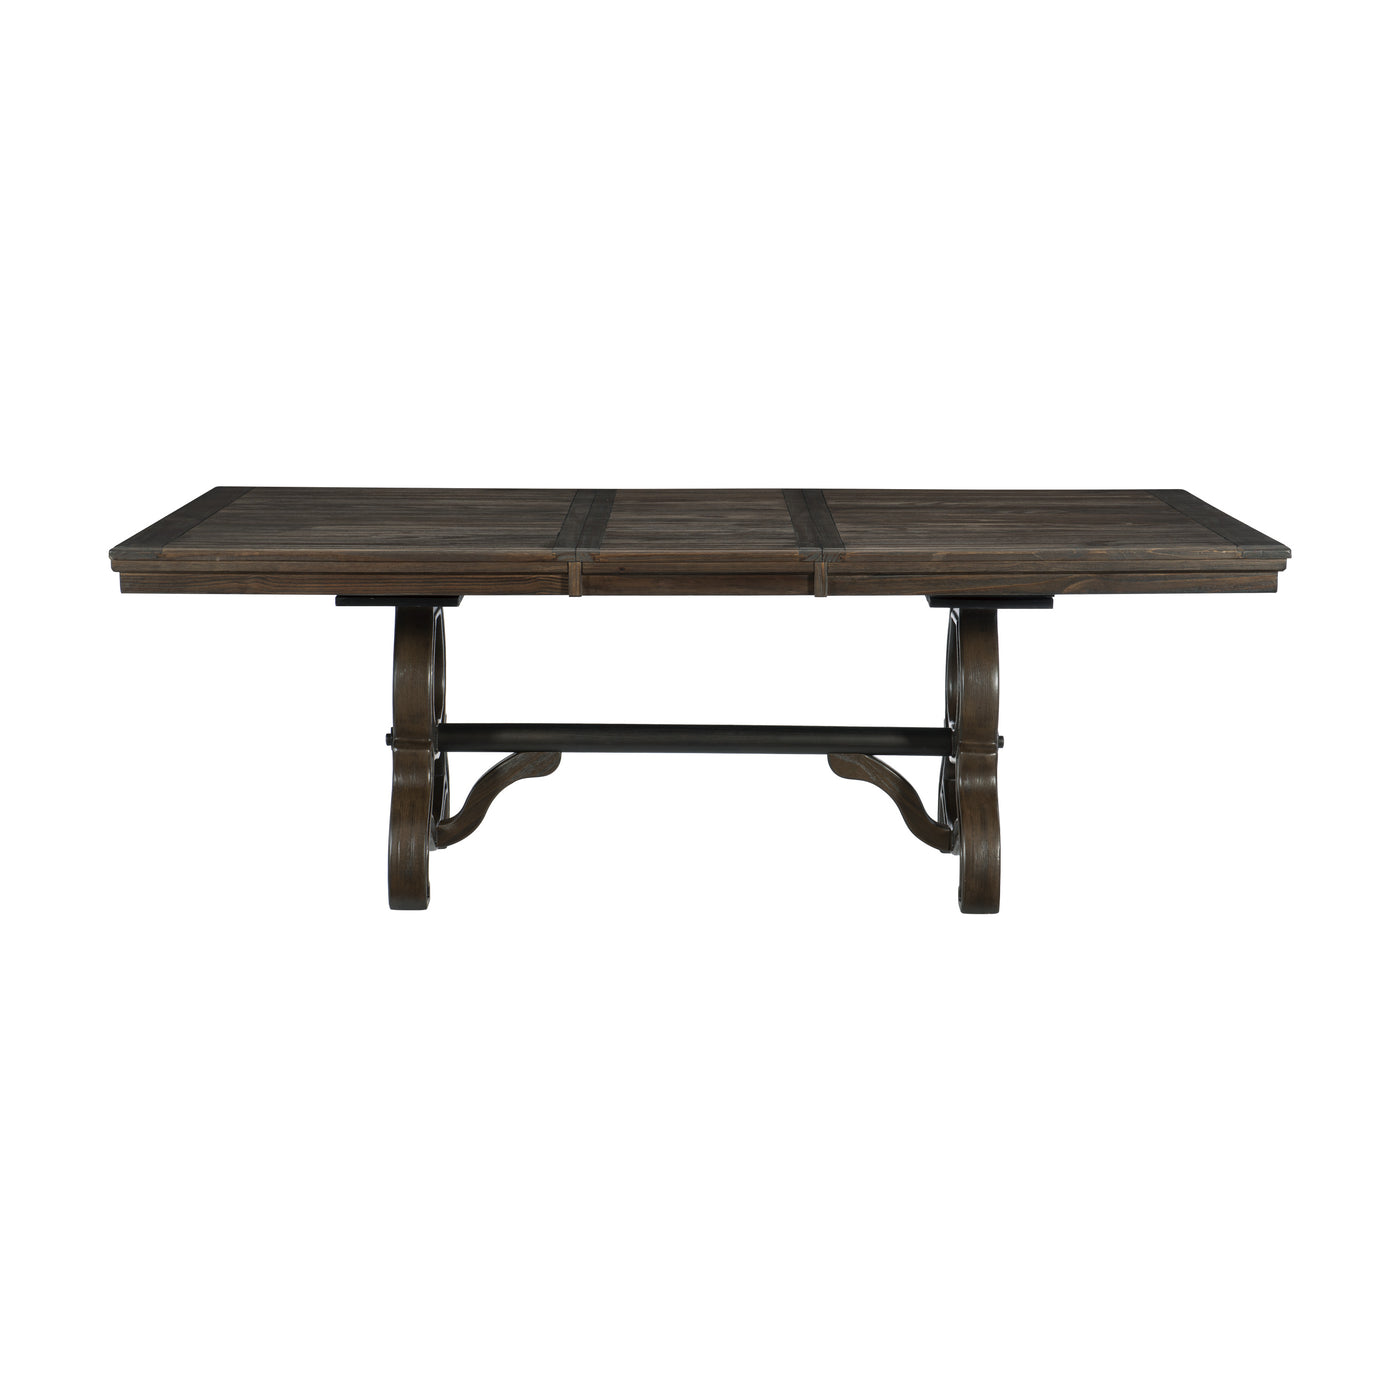 Gloversville Extendable Dining Table - Brown